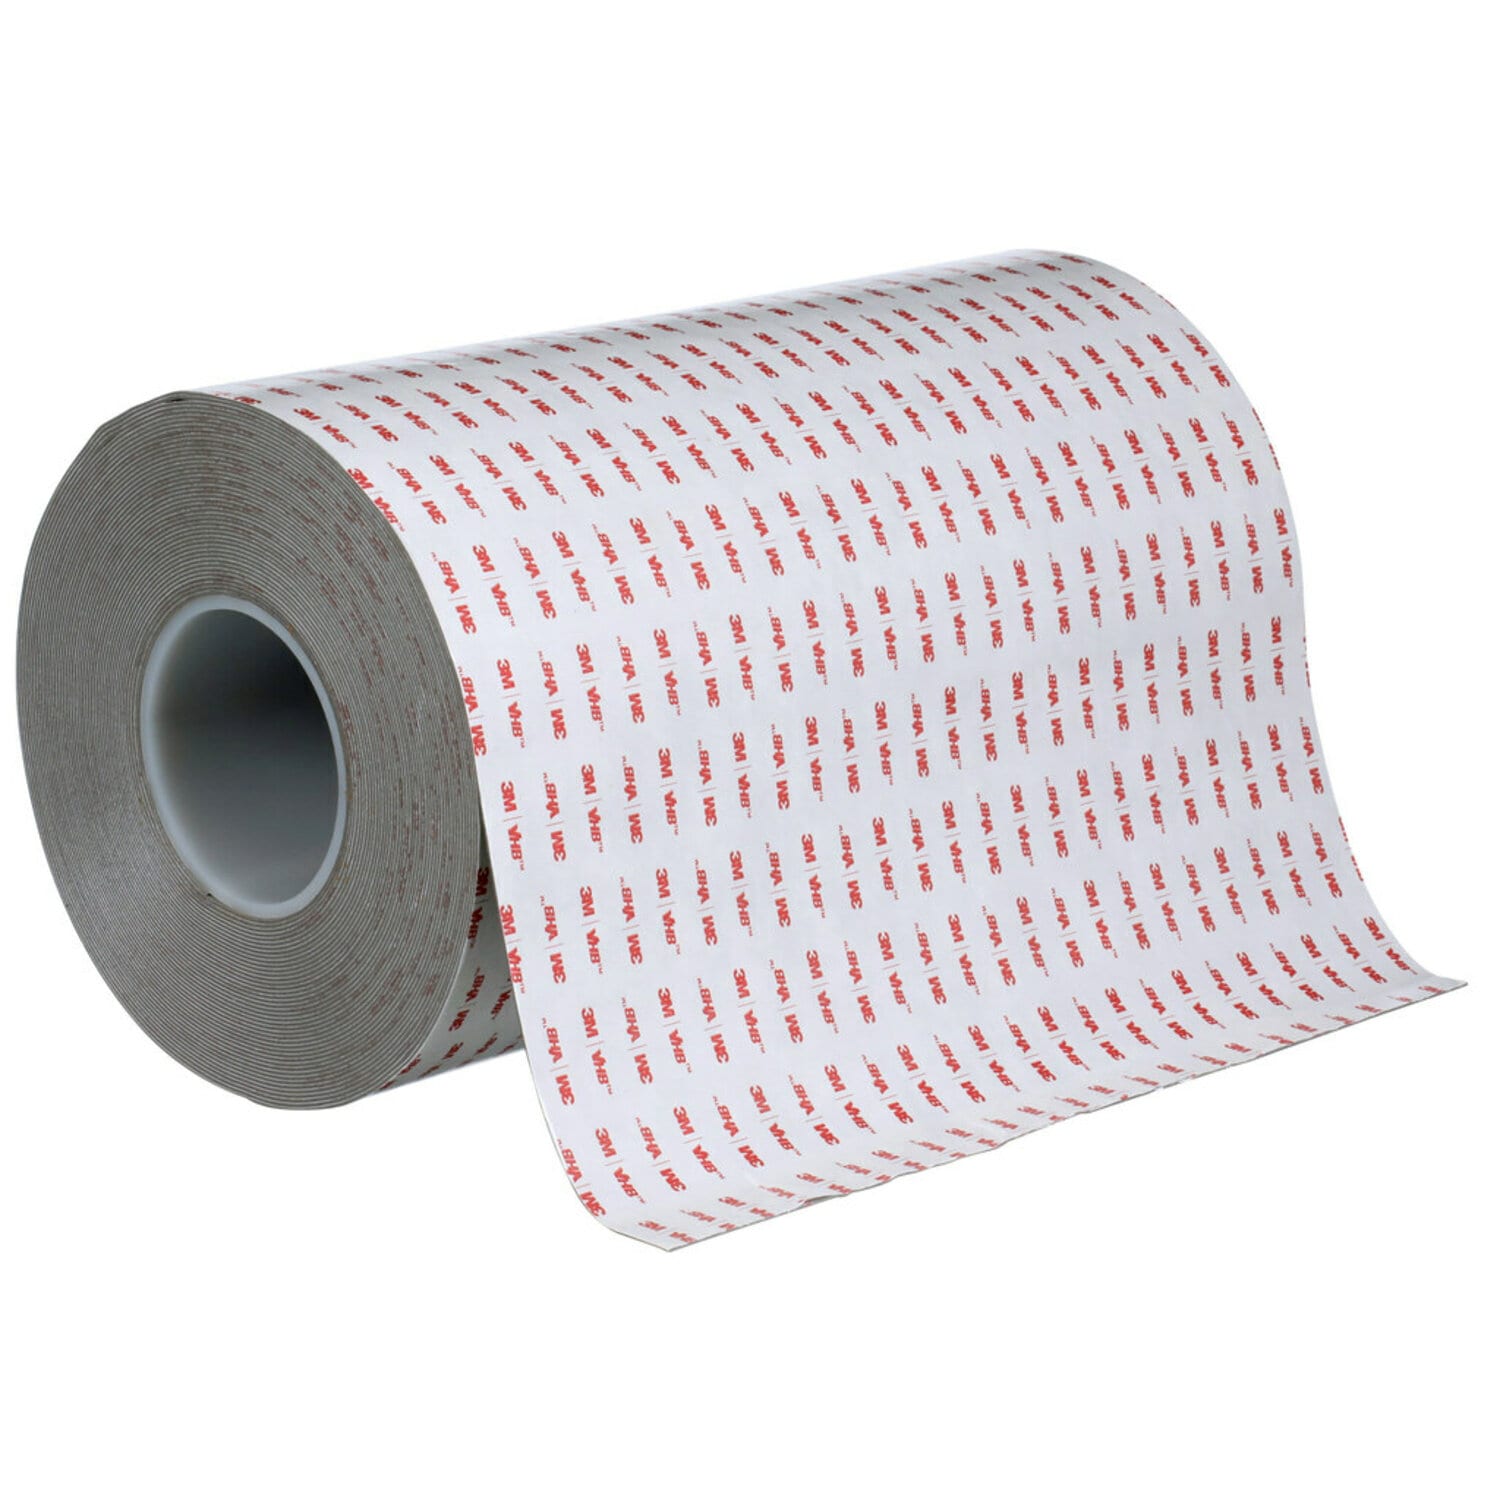 7100273406 - 3M VHB Tape RP+110GP, Gray, 44 in x 36 yd, 45 mil, Paper Liner, 1/Case